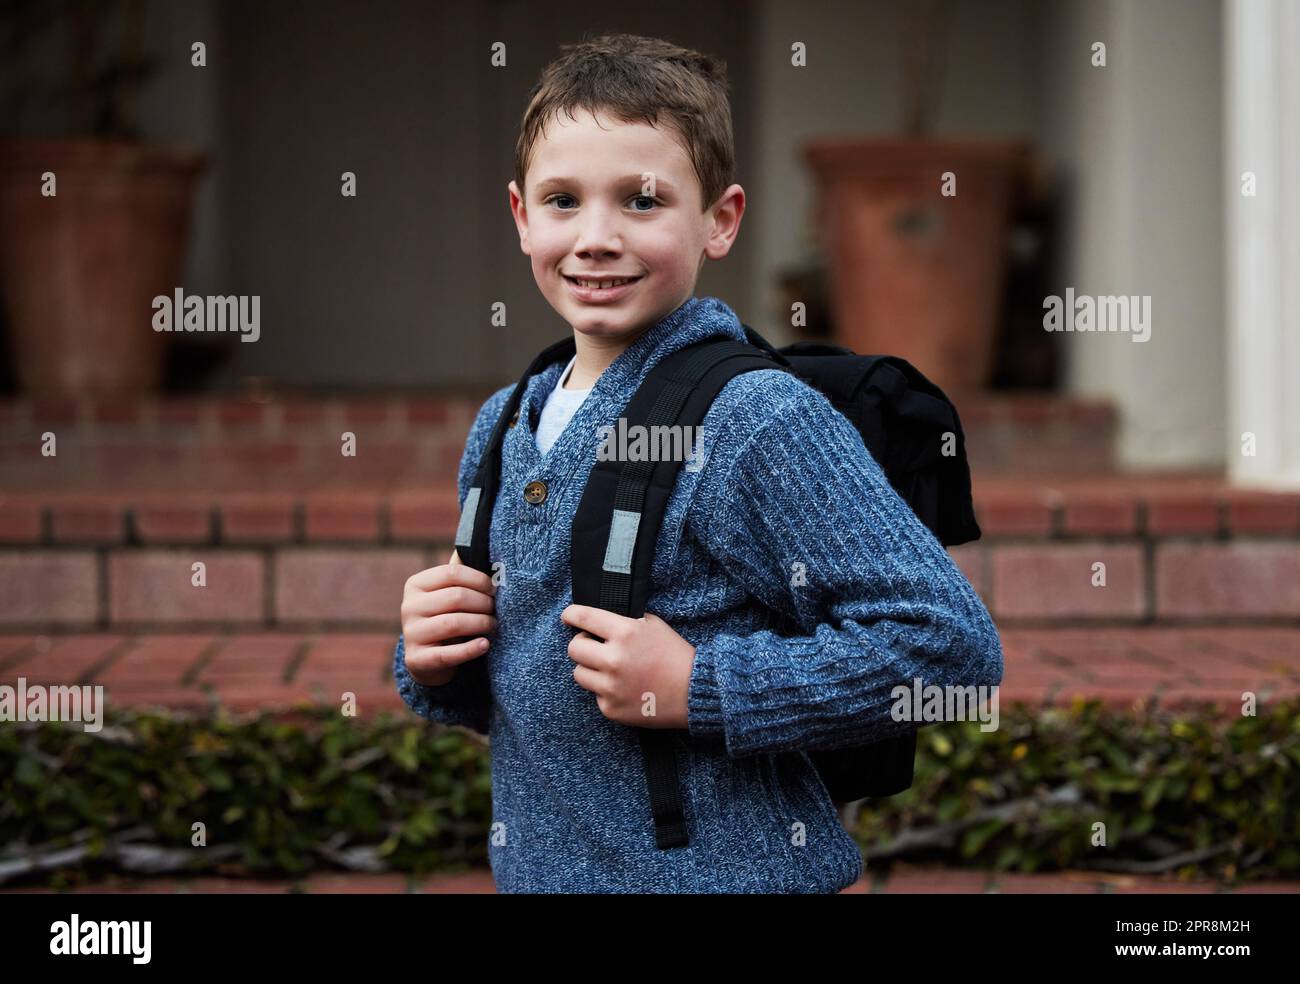 Ready to make some new friends. a little boy getting ready to go to school. Stock Photo